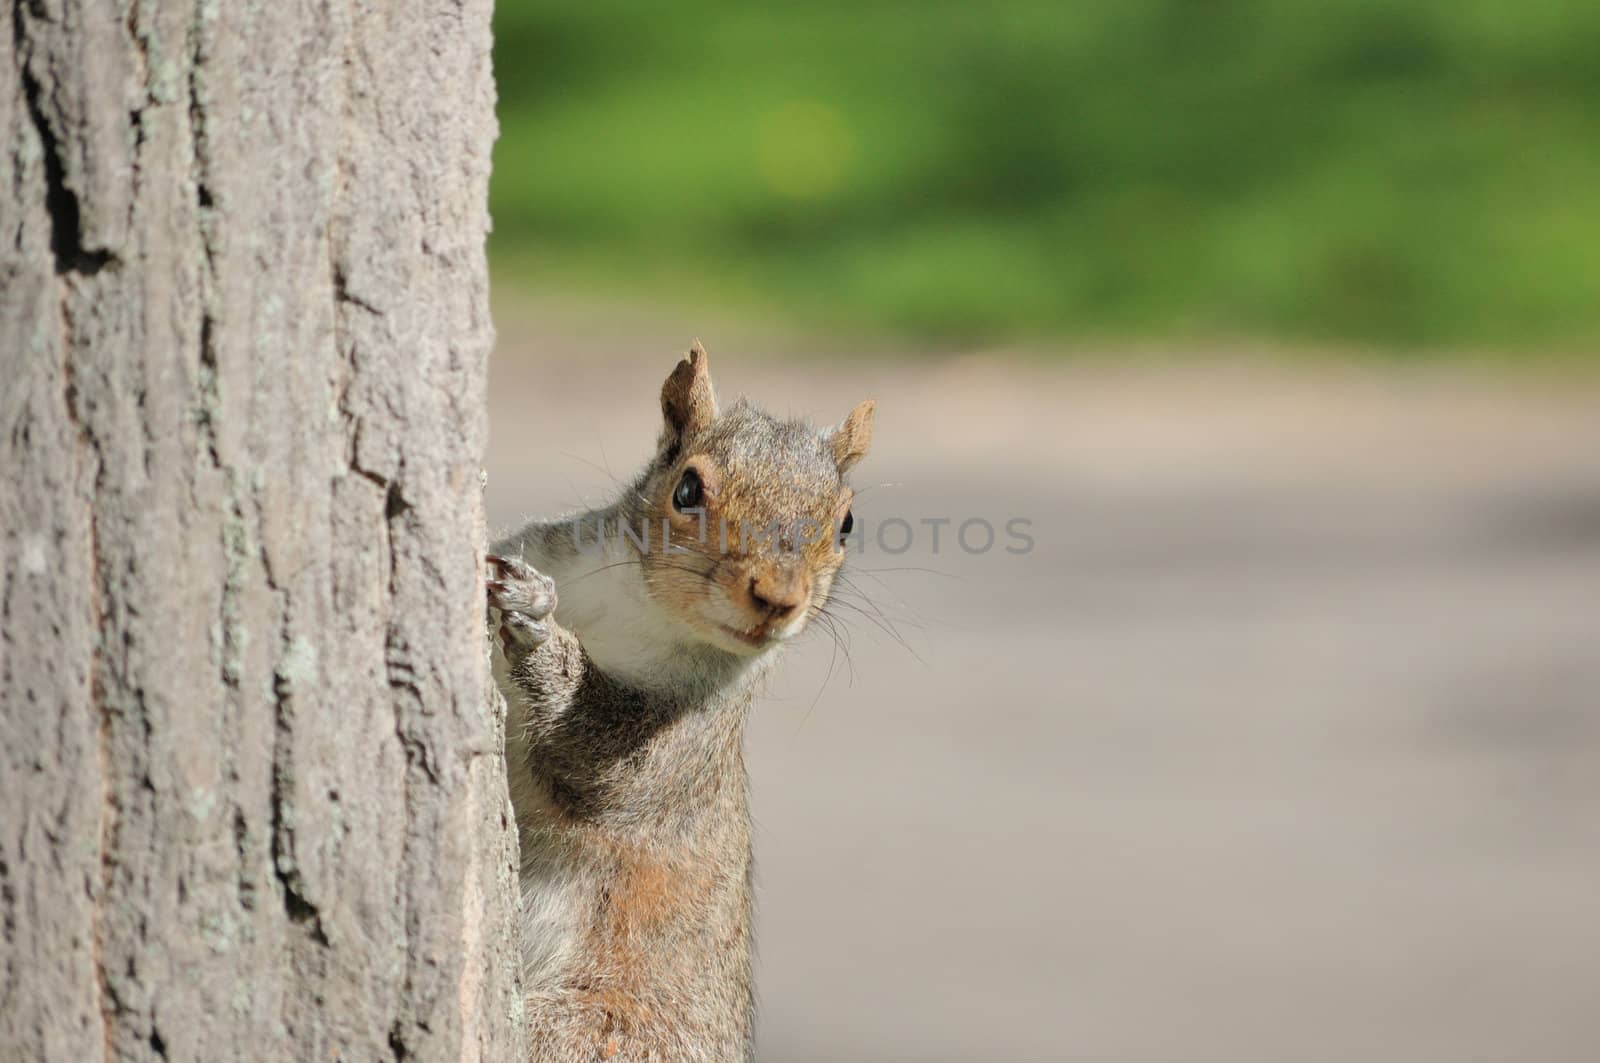 A gray squirrel perched in a tree.